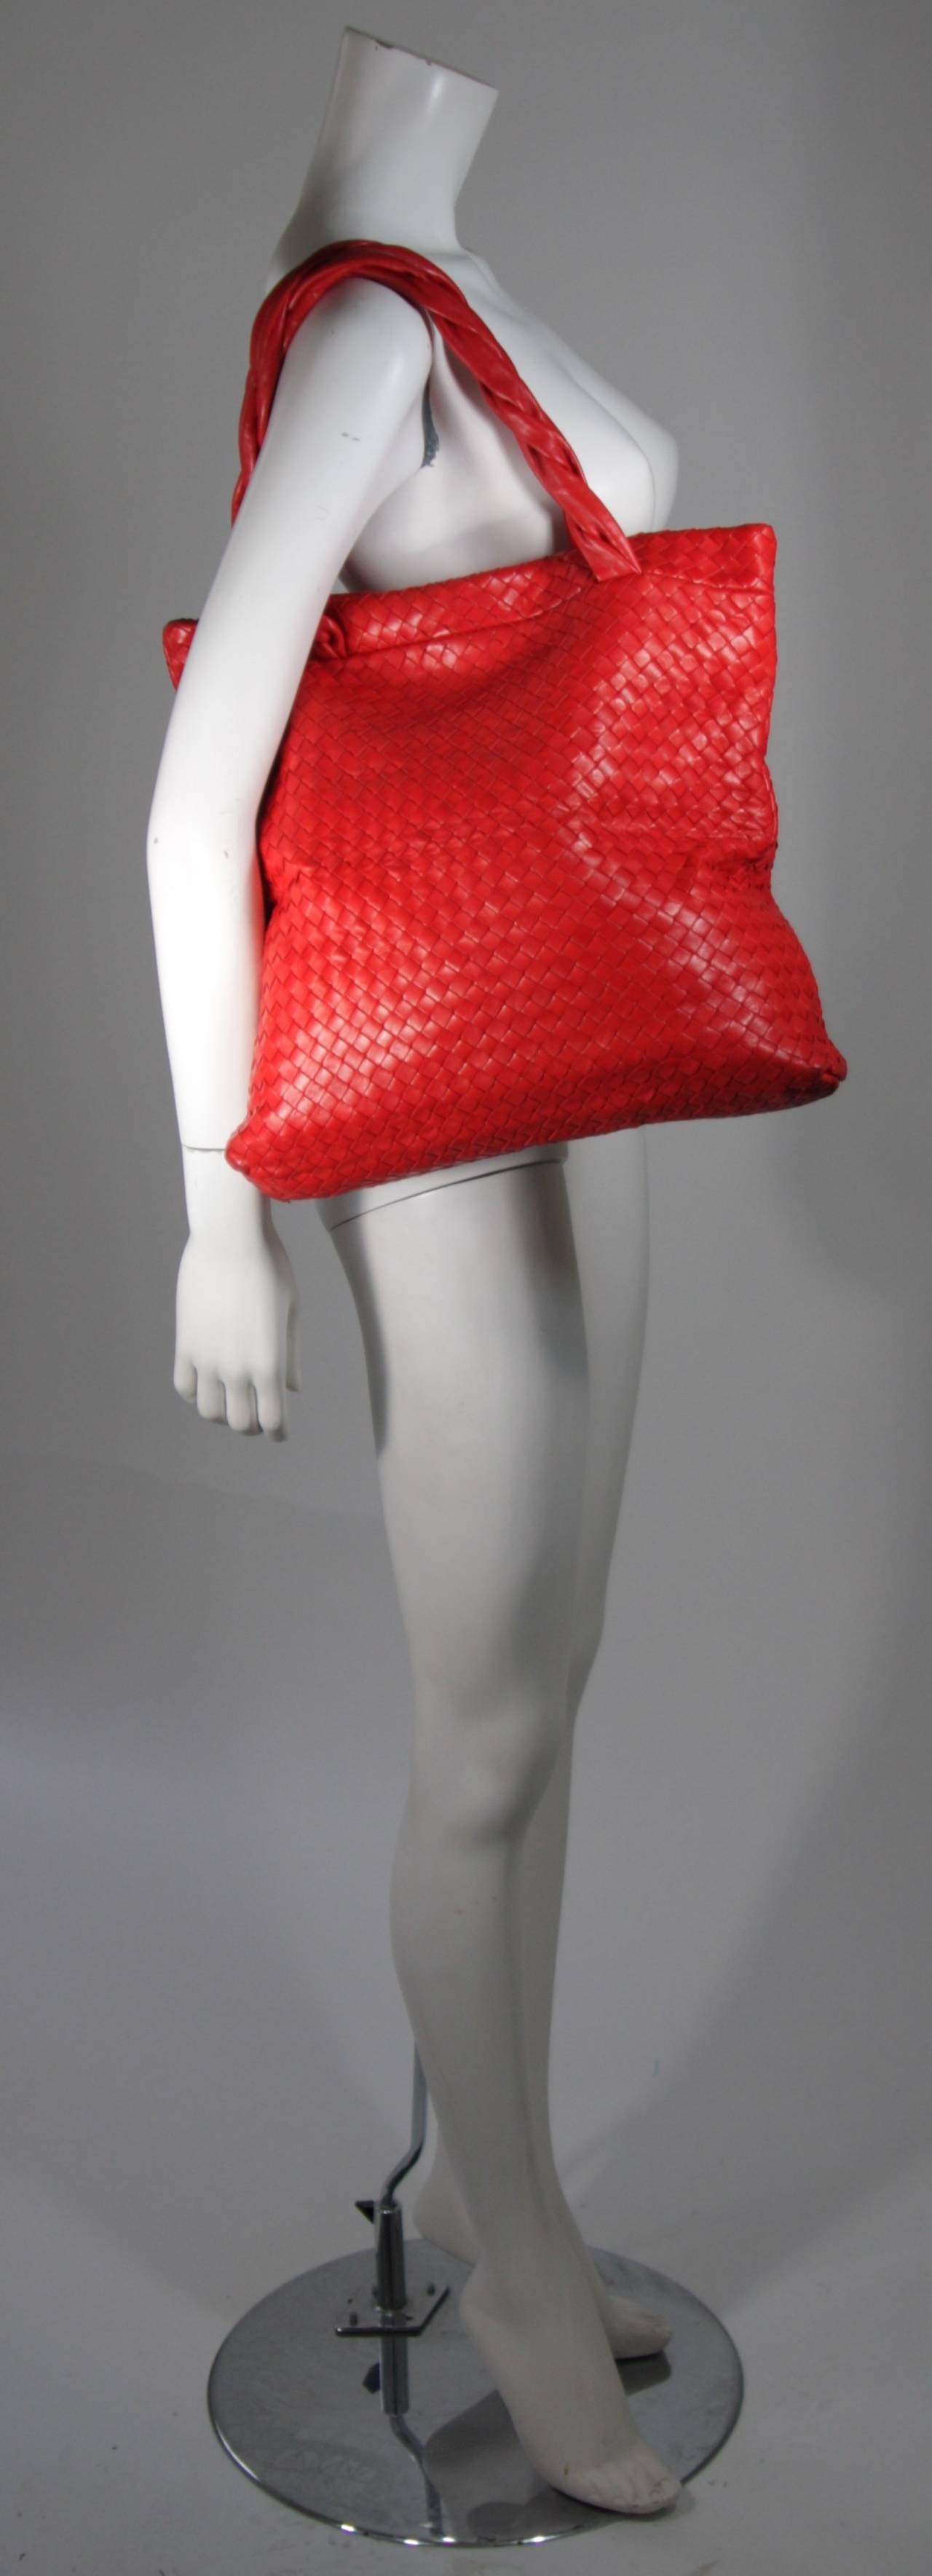 This vintage Bottega Veneta is available for viewing at our Beverly Hills Boutique. We offer a large selection of evening gowns and luxury garments.

This handbag is composed of a supple ultra red leather in the classic Bottega Veneta interwoven